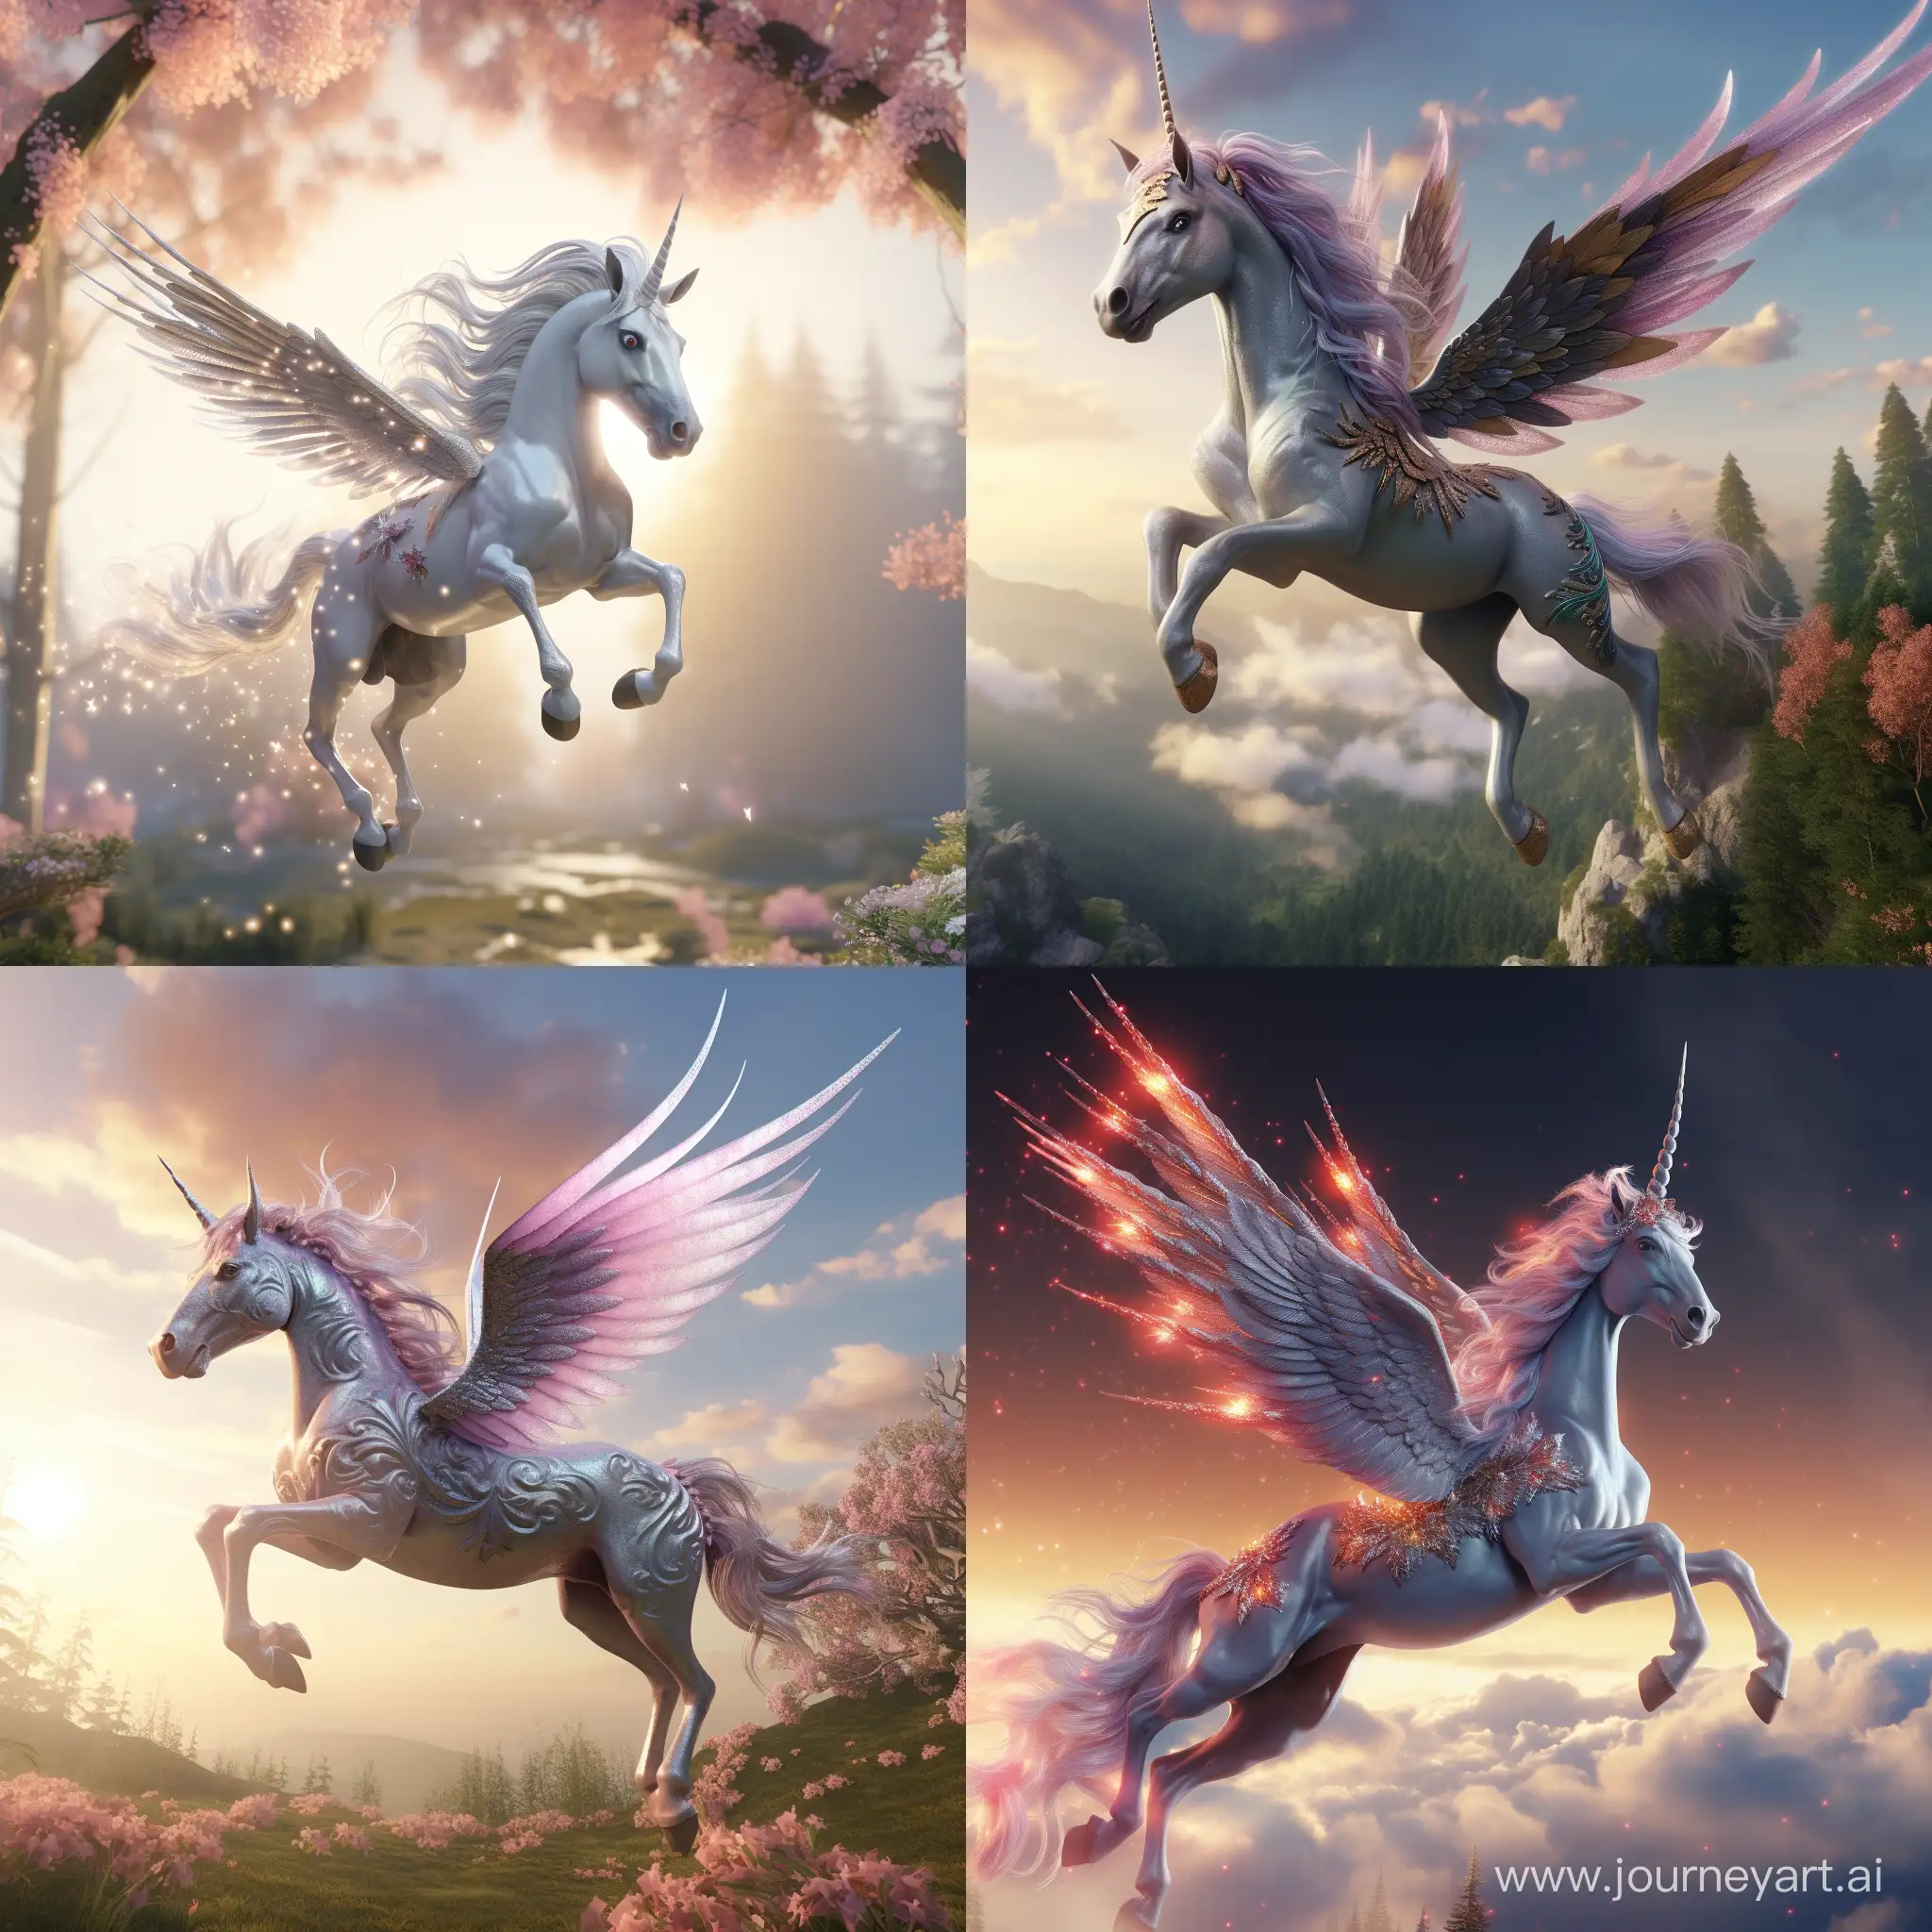 Majestic-3D-Animation-of-a-Flying-Unicorn-in-a-Magical-Realm